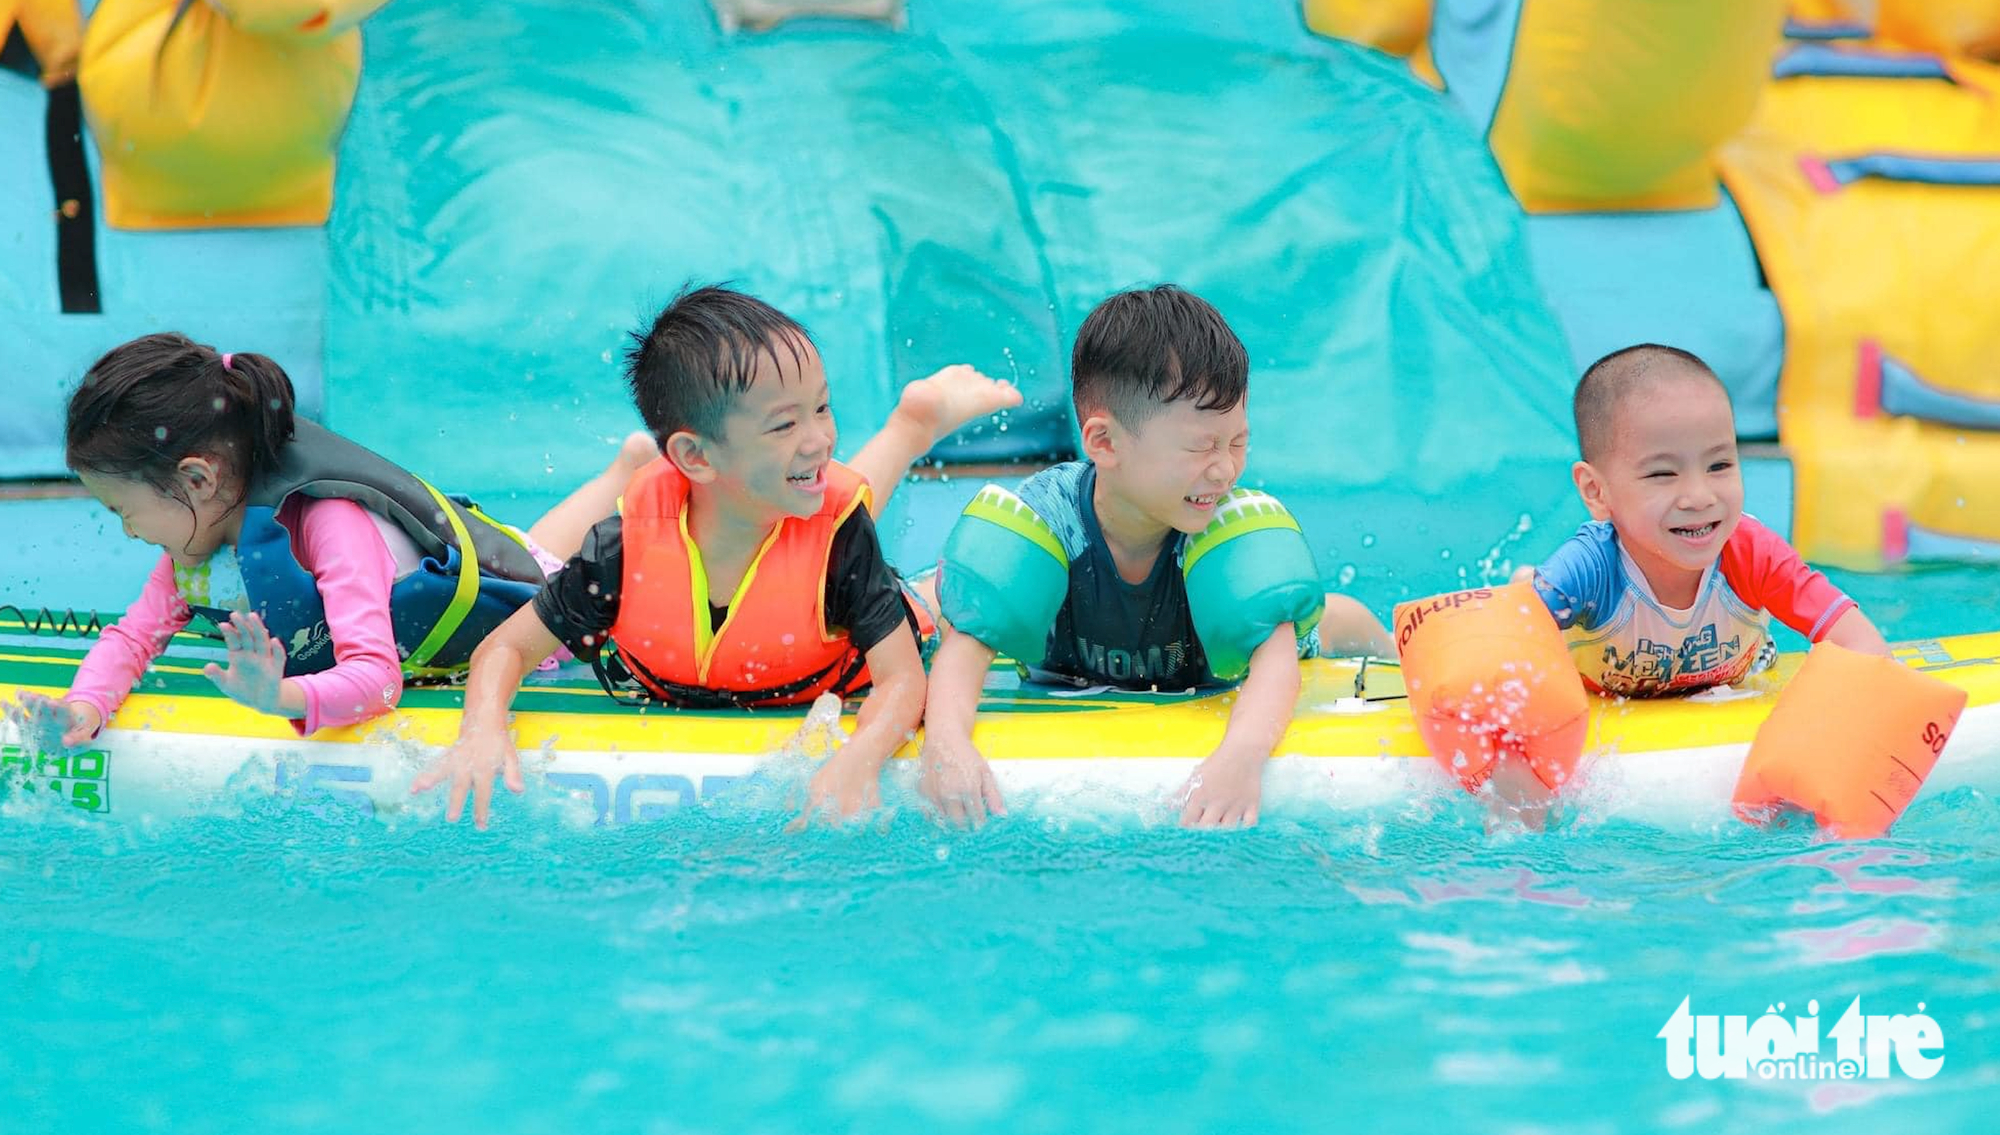 North-central Vietnam province to spend over $1mn teaching kids how to swim